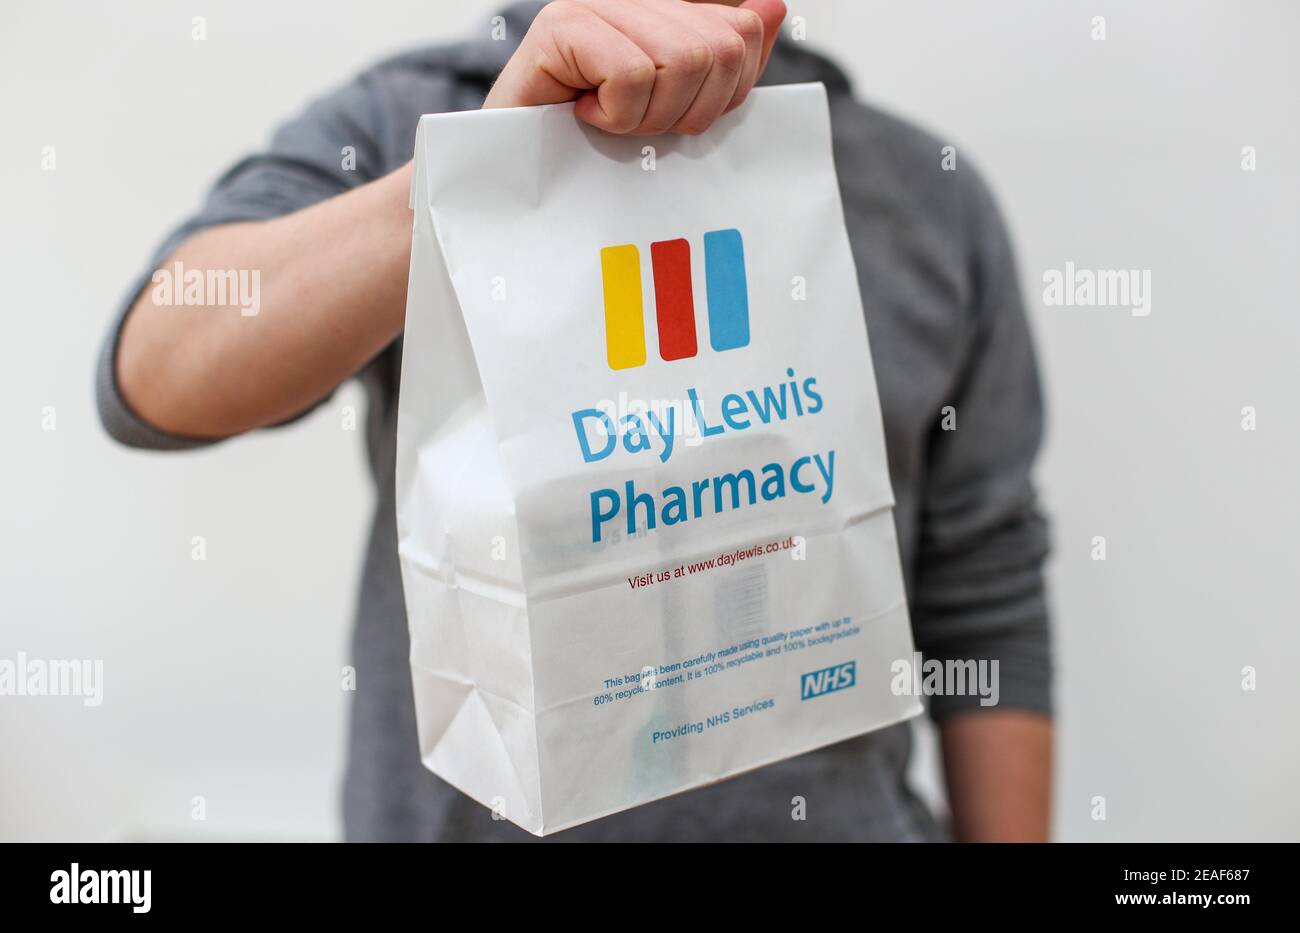 A man handing over an NHS prescription from Day Lewis pharmacy. Stock Photo